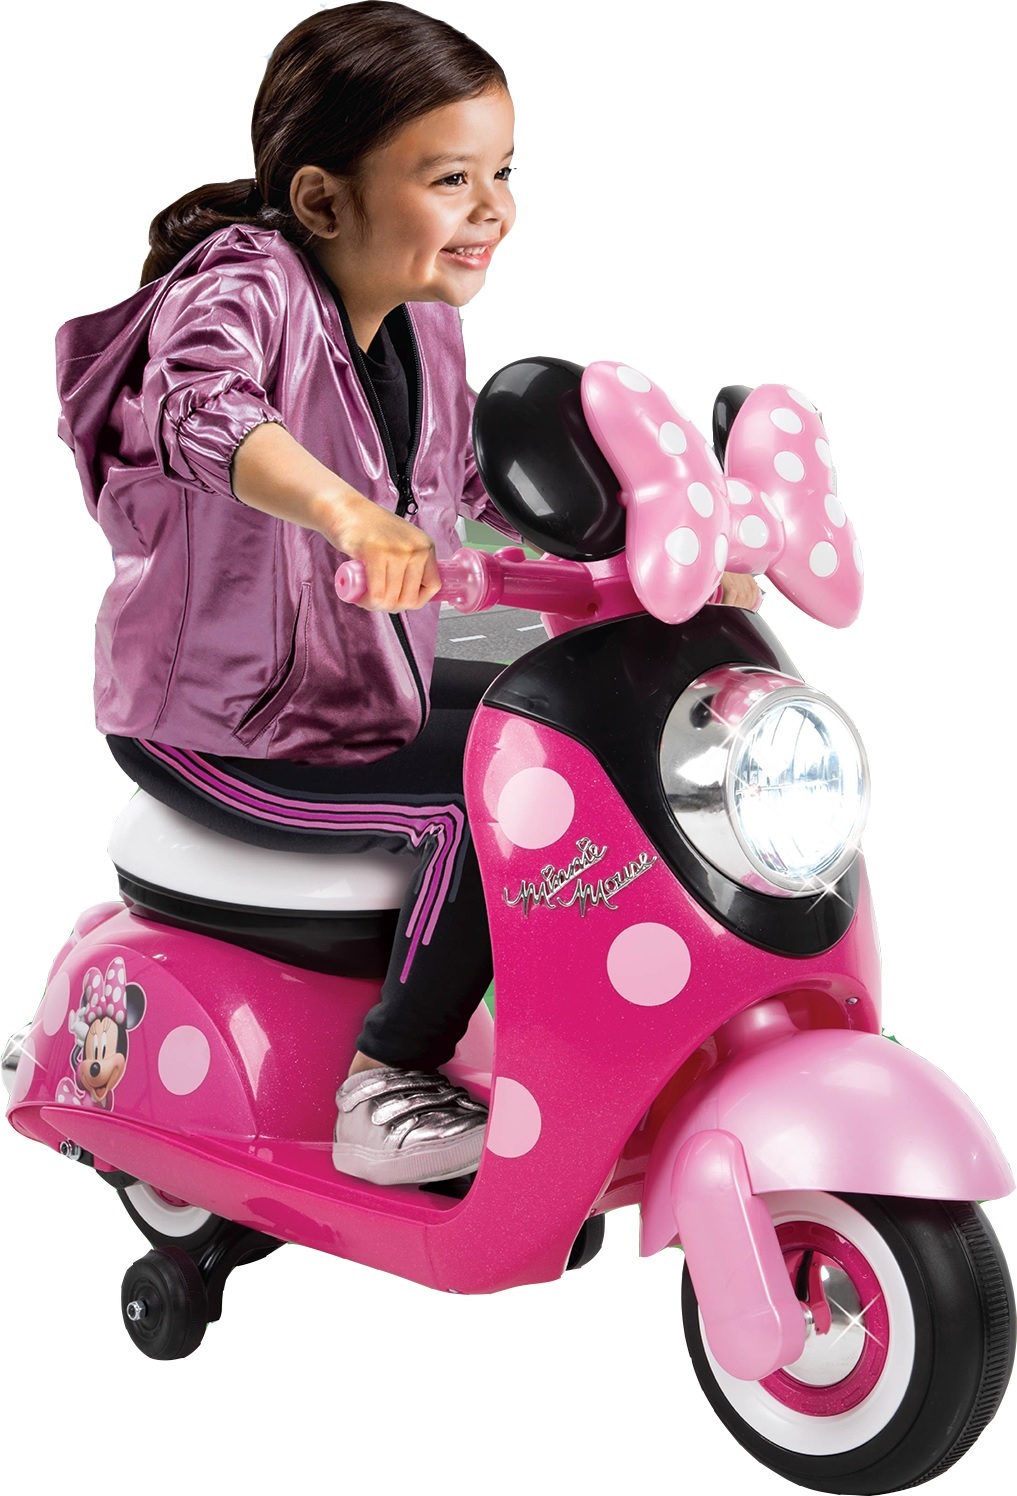 Disney Minnie Mouse 6V Euro Scooter Ride-on Battery-Powered Toy for Girls, Ages 1.5+ Years, by Huffy - image 1 of 14